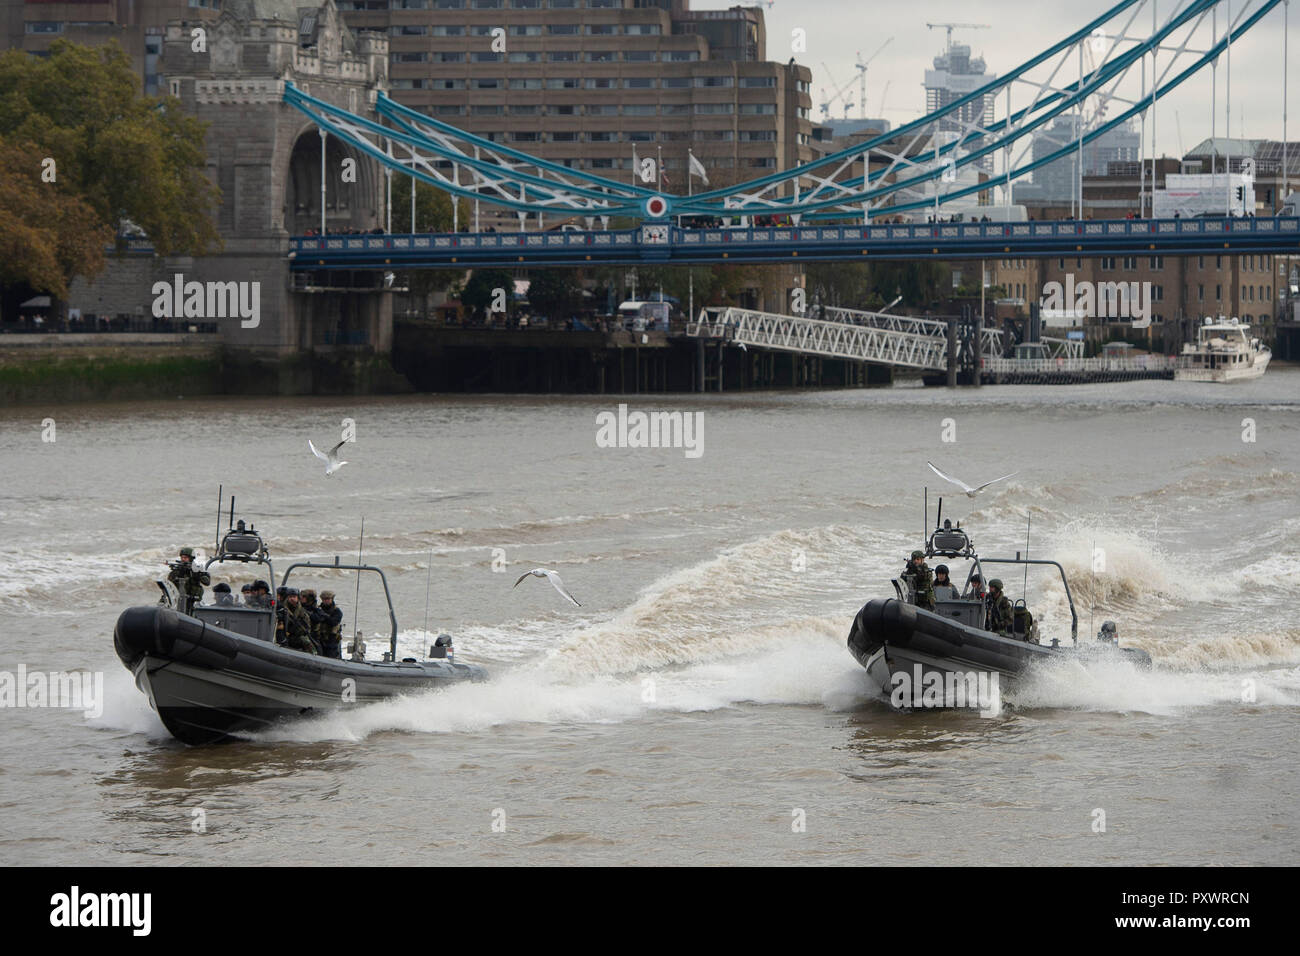 an on-the-water capability demonstration between the Royal Netherlands Marine Corps and the Royal Marines watched by King Willem-Alexander and Queen Maxima of the Netherlands during their state visit to the UK. Stock Photo